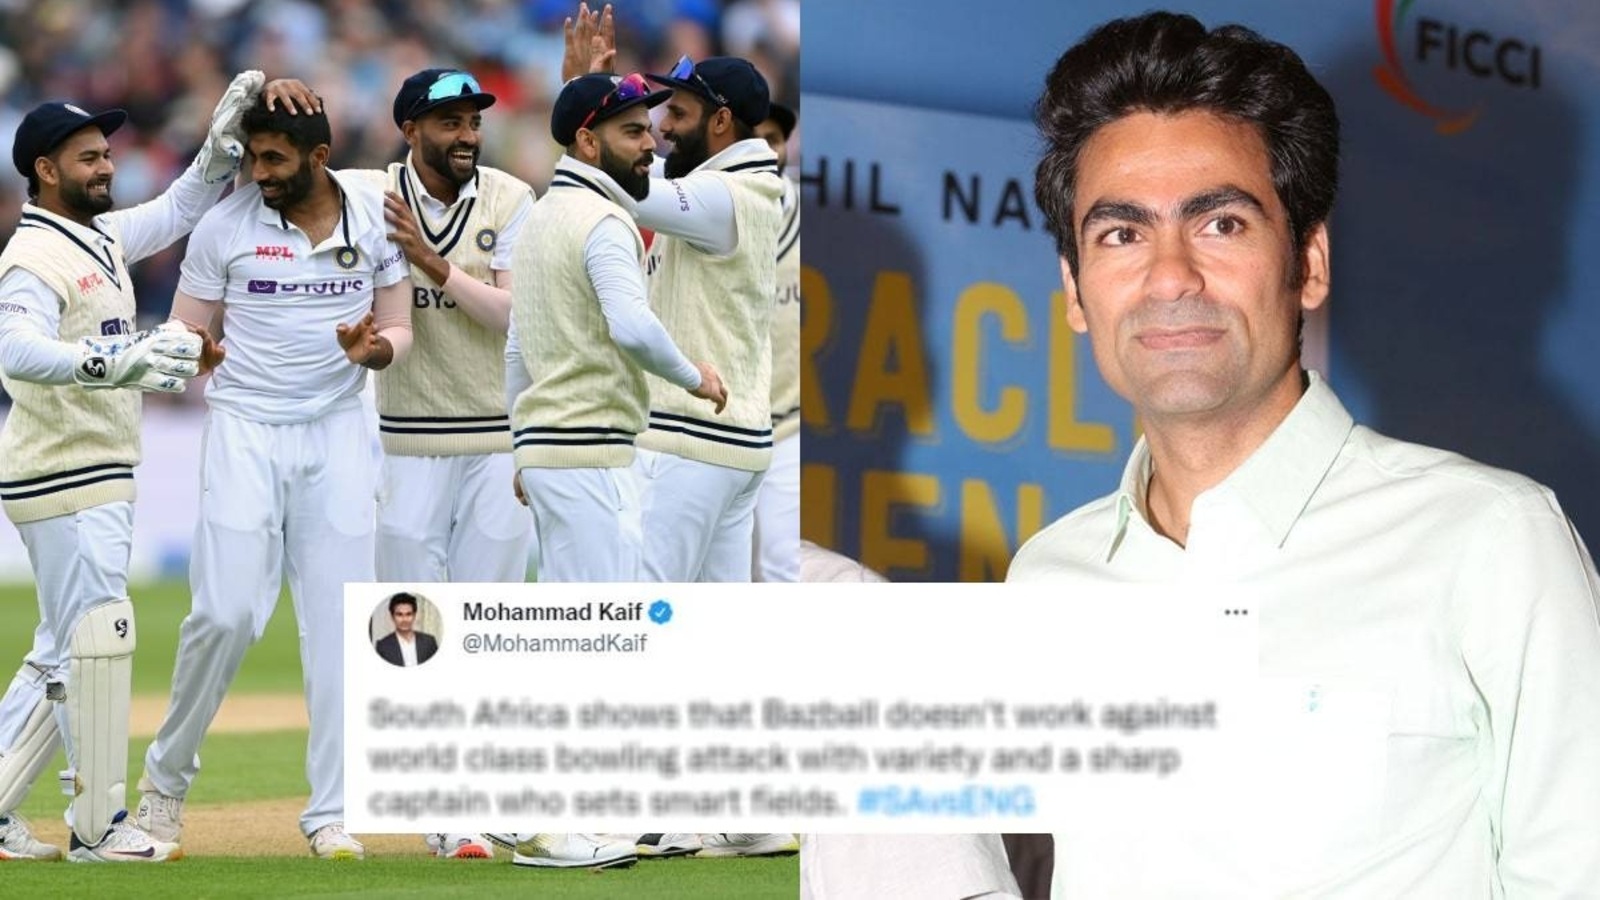 it-means-our-bowling-ain-t-world-class-kaif-slammed-for-taking-dig-at-bumrah-and-team-india-with-bazball-tweet